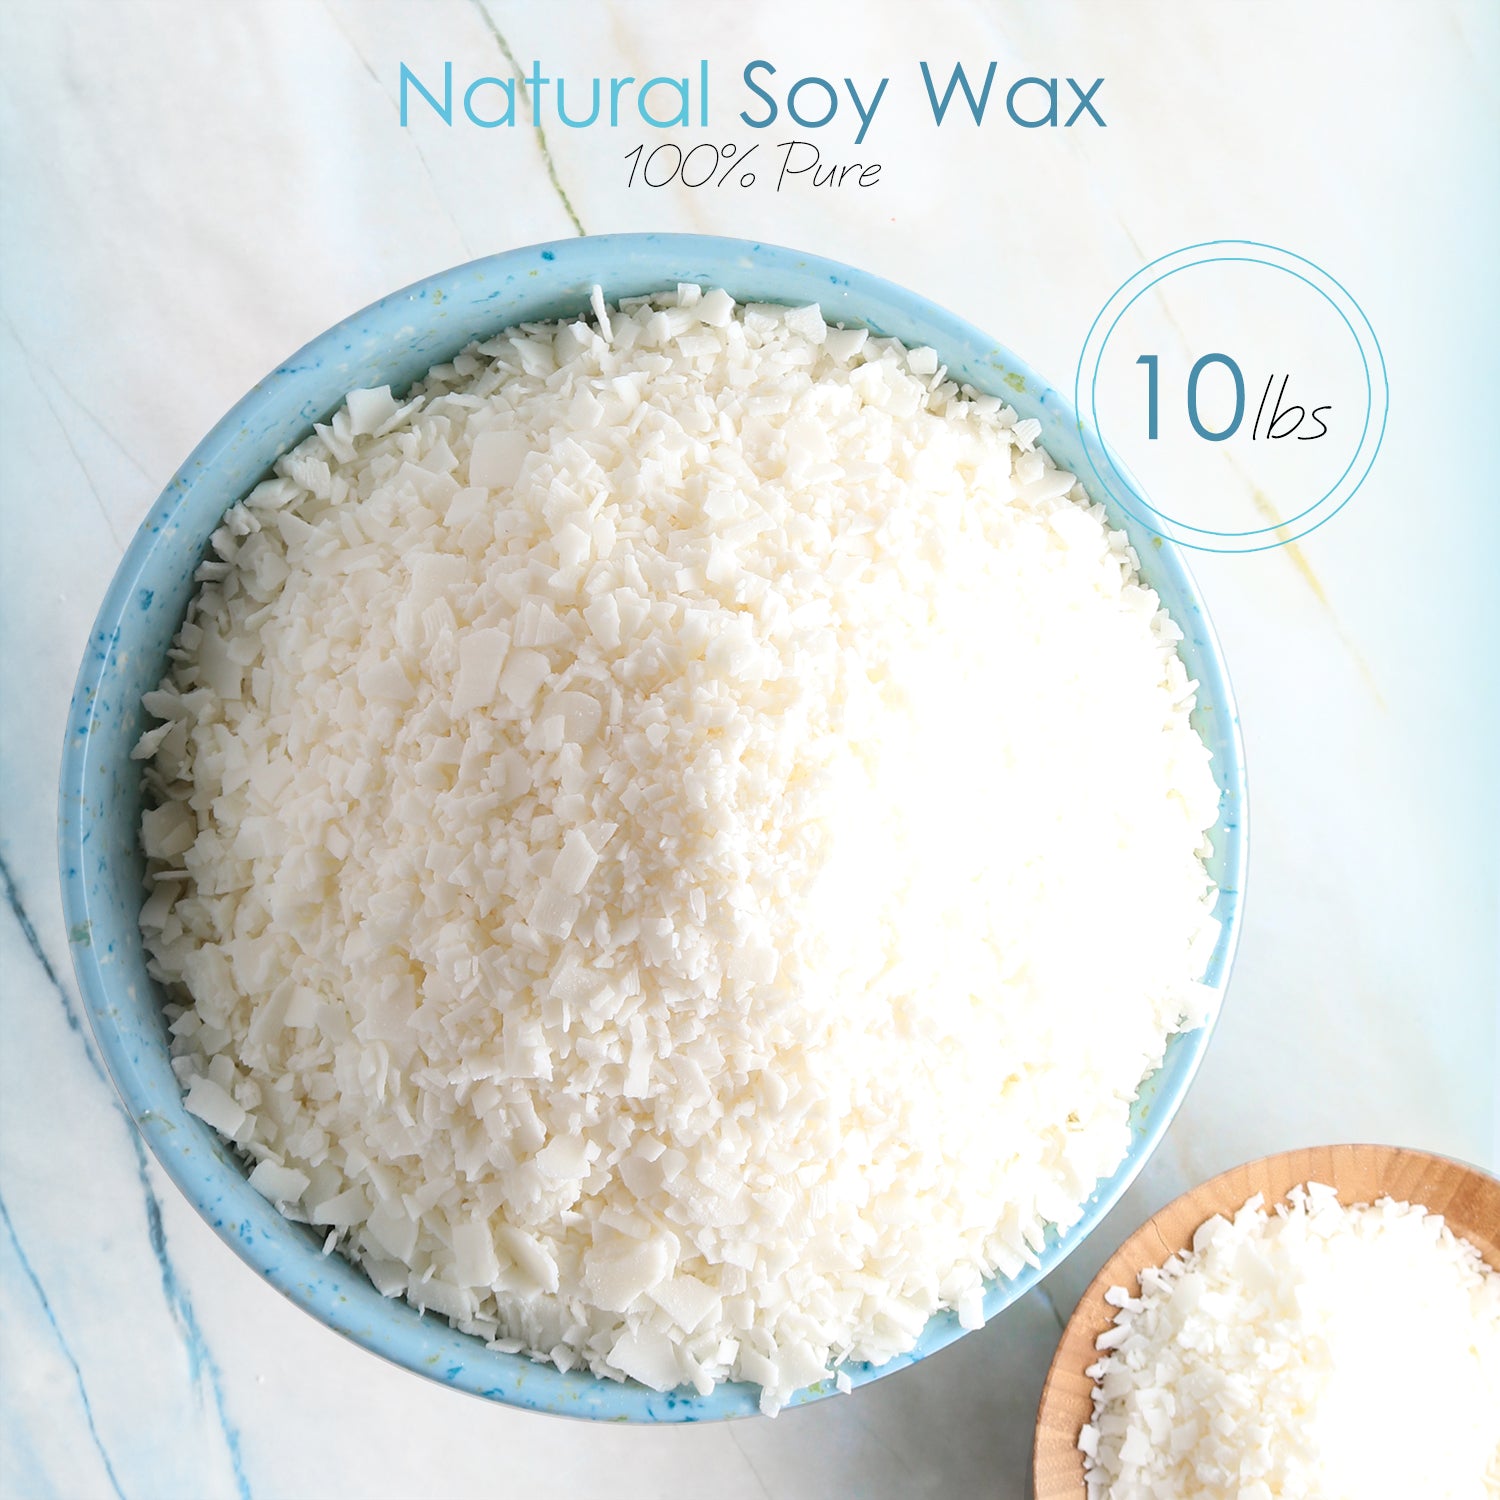 Hearth & Harbor Natural Soy Wax and DIY Candle Making Supplies - 10lb Wax + Accessories